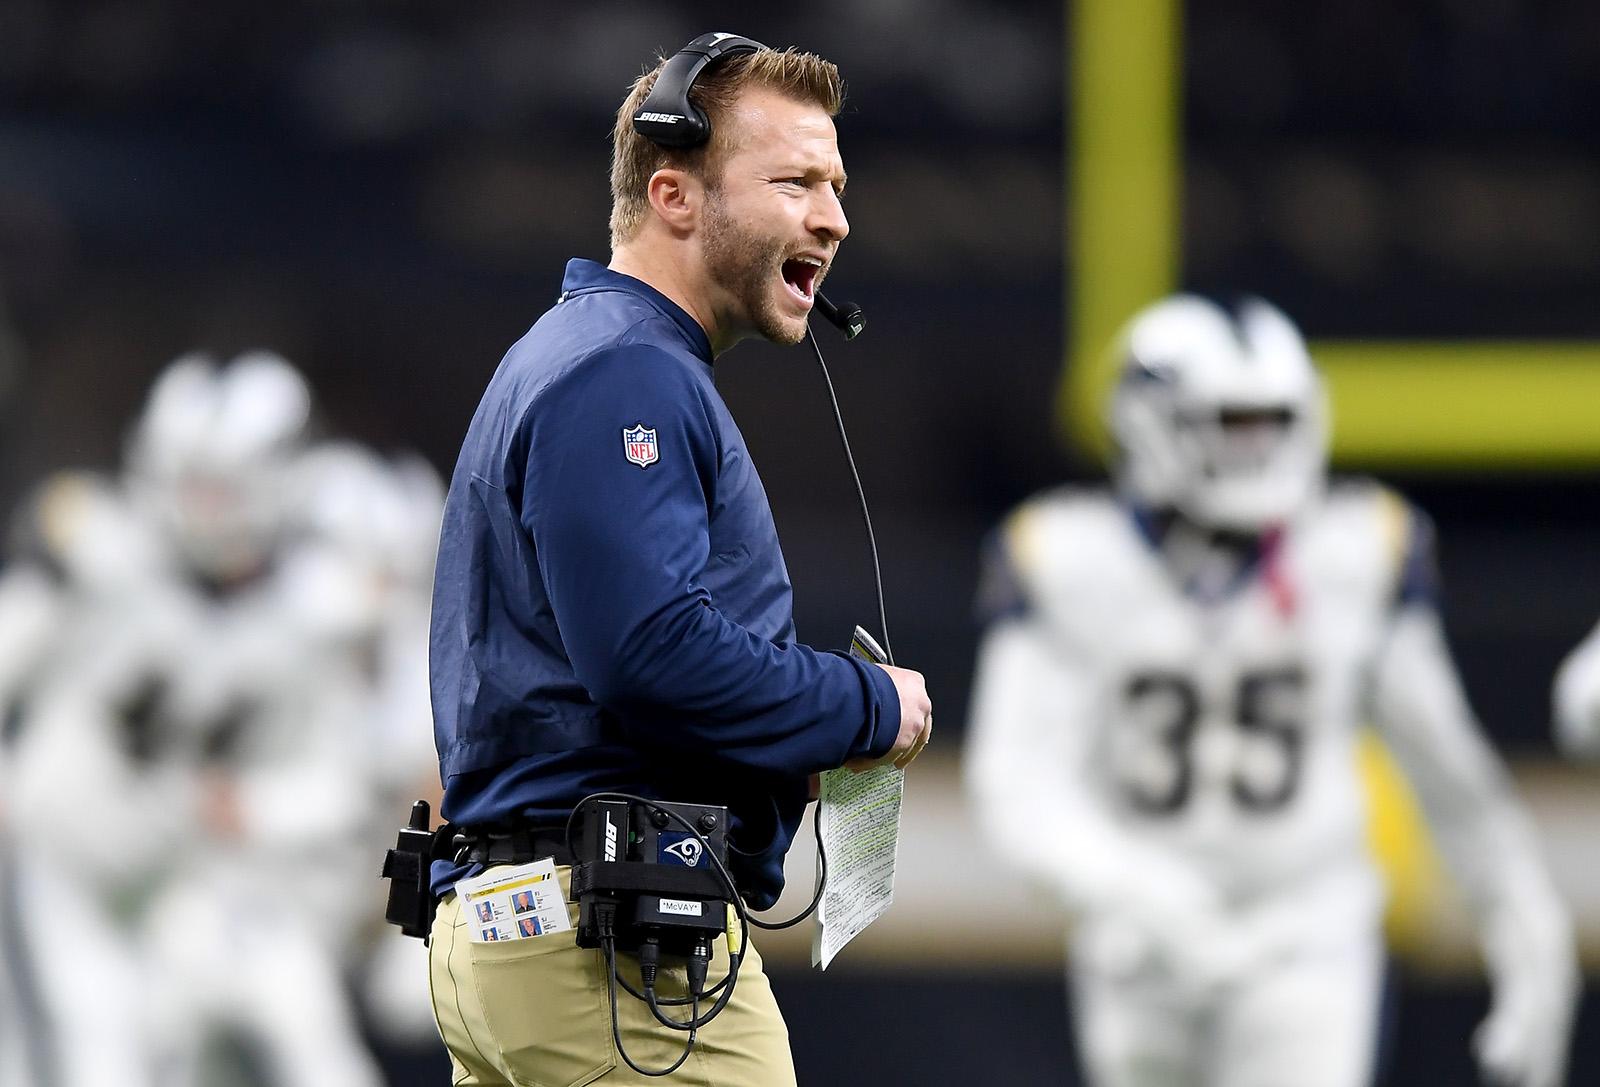 Los Angeles Rams head coach Sean McVay argues with a referee against the New Orleans Saints in the NFC Championship game on Sunday, Jan. 20, 2019 at the Superdome in New Orleans, La. (Wally Skalij/Los Angeles Times/TNS)